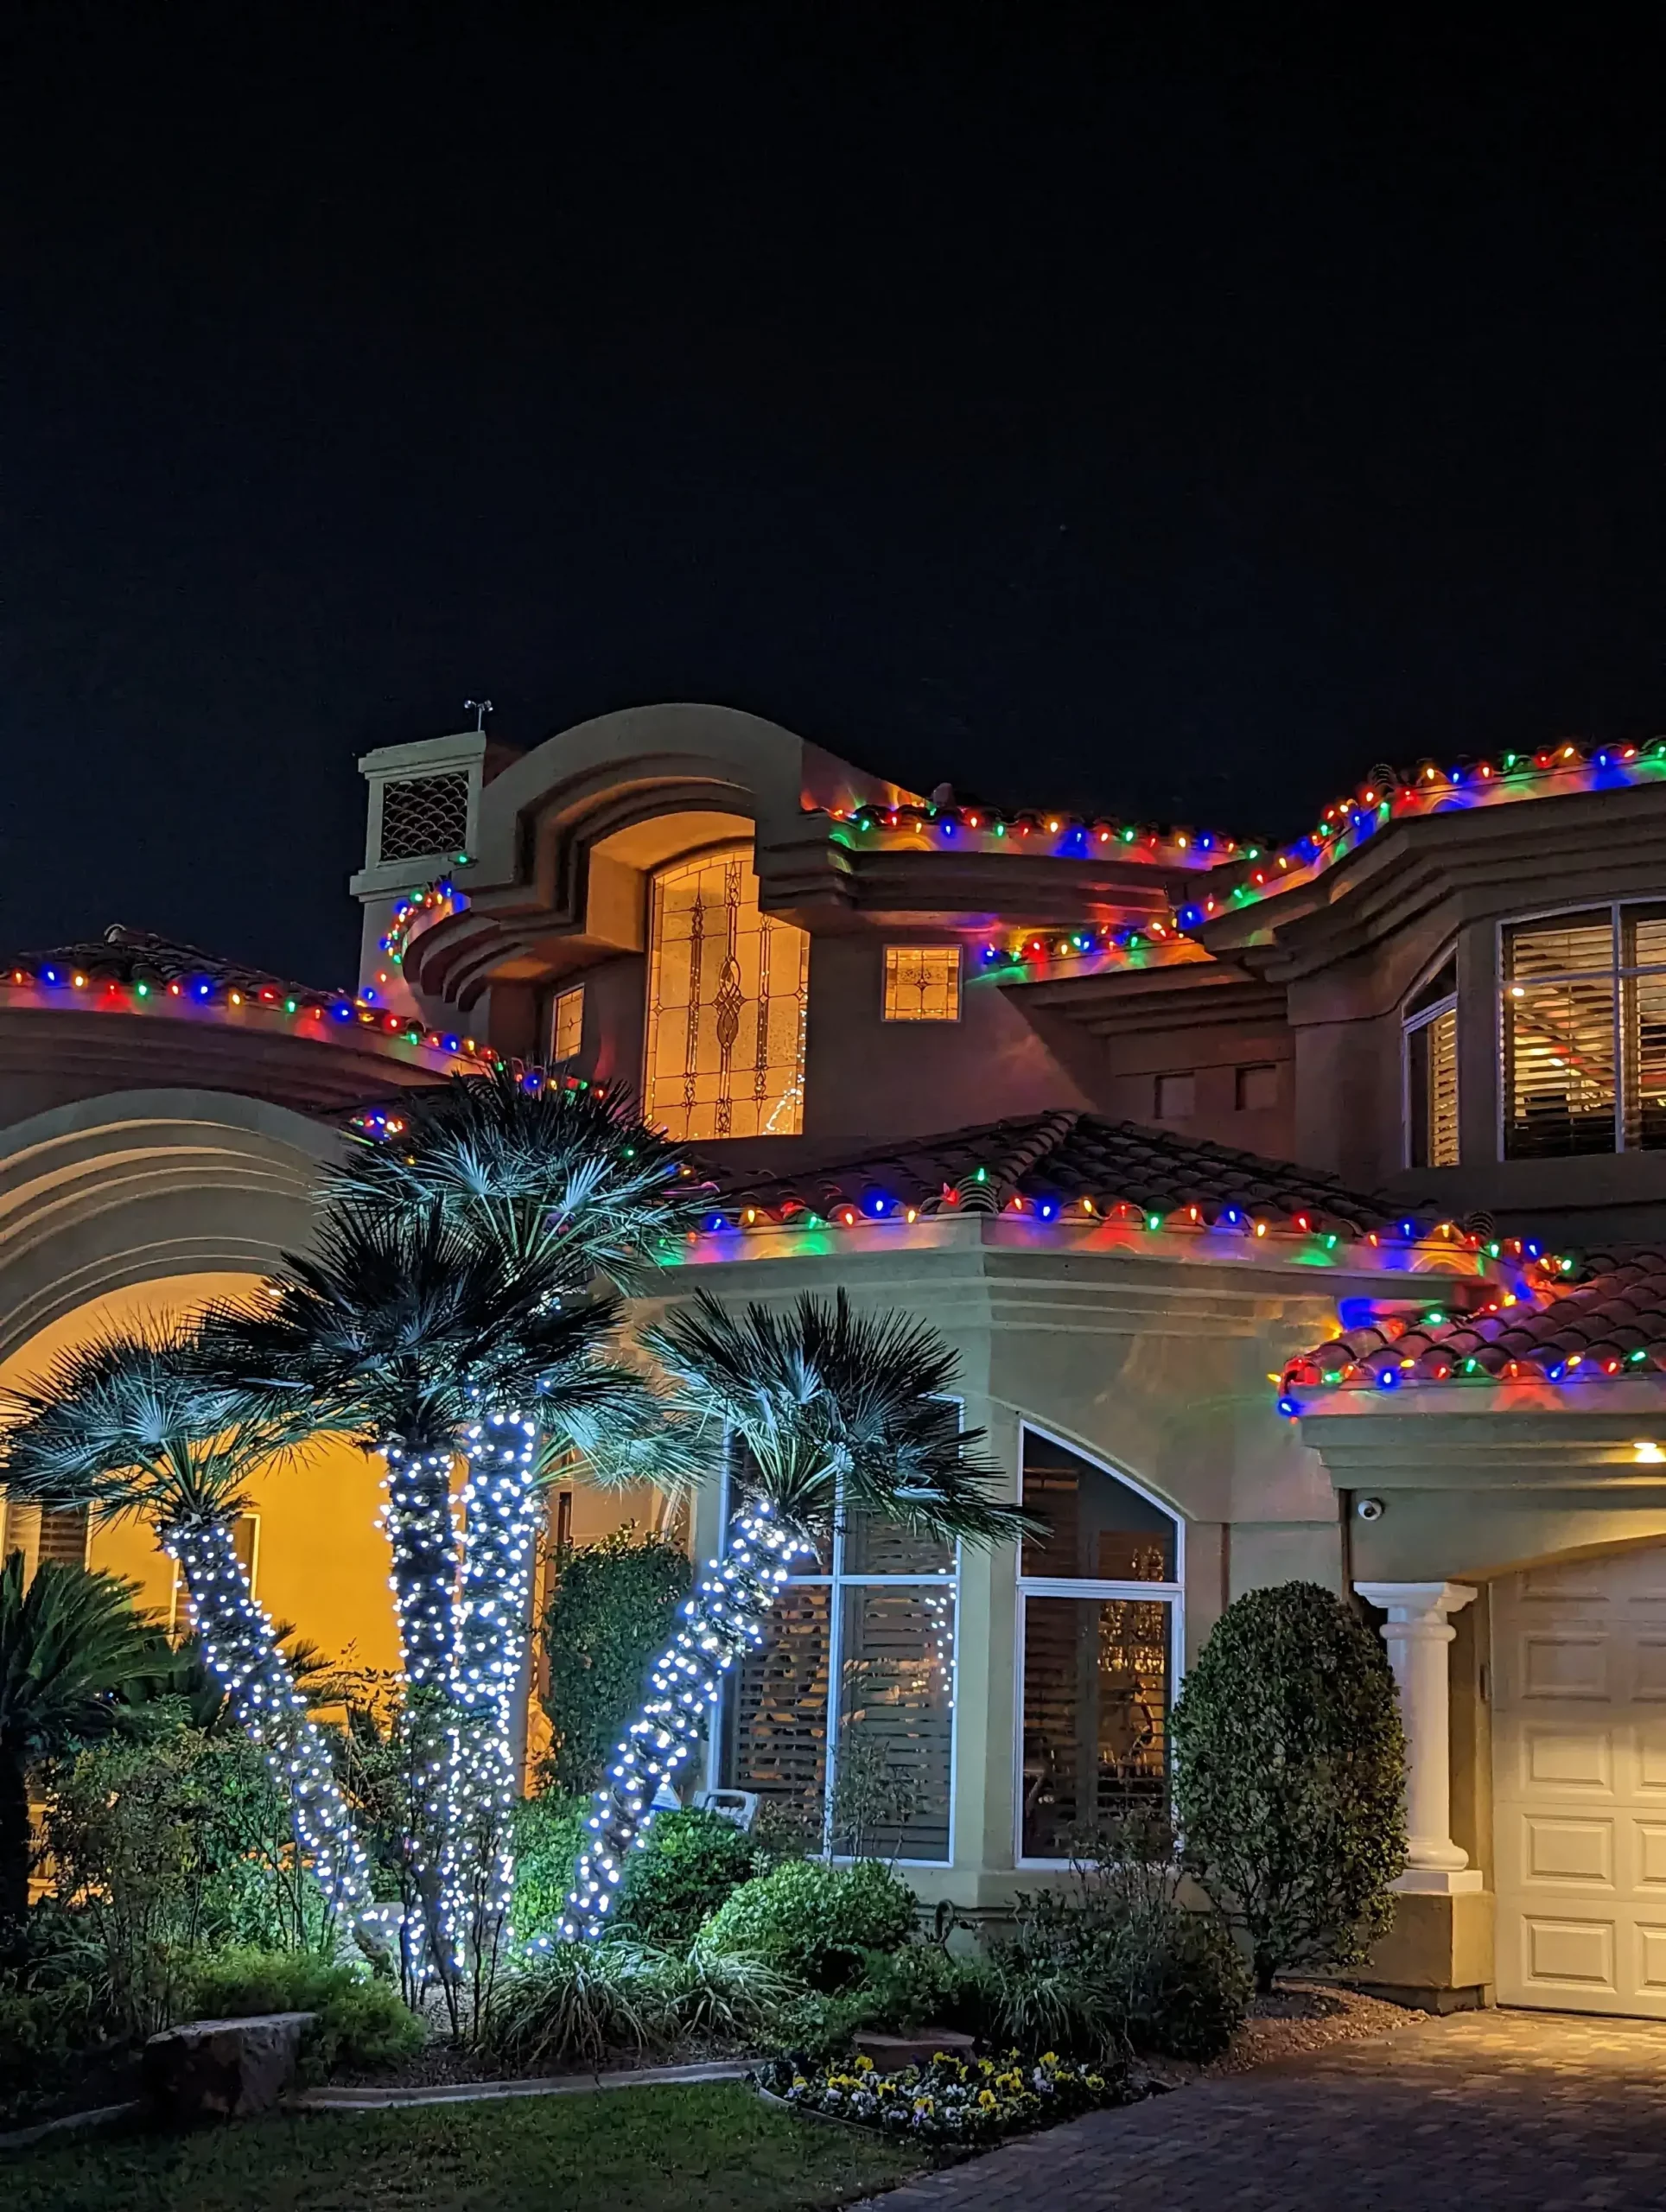 House Decorated With Christmas Lights